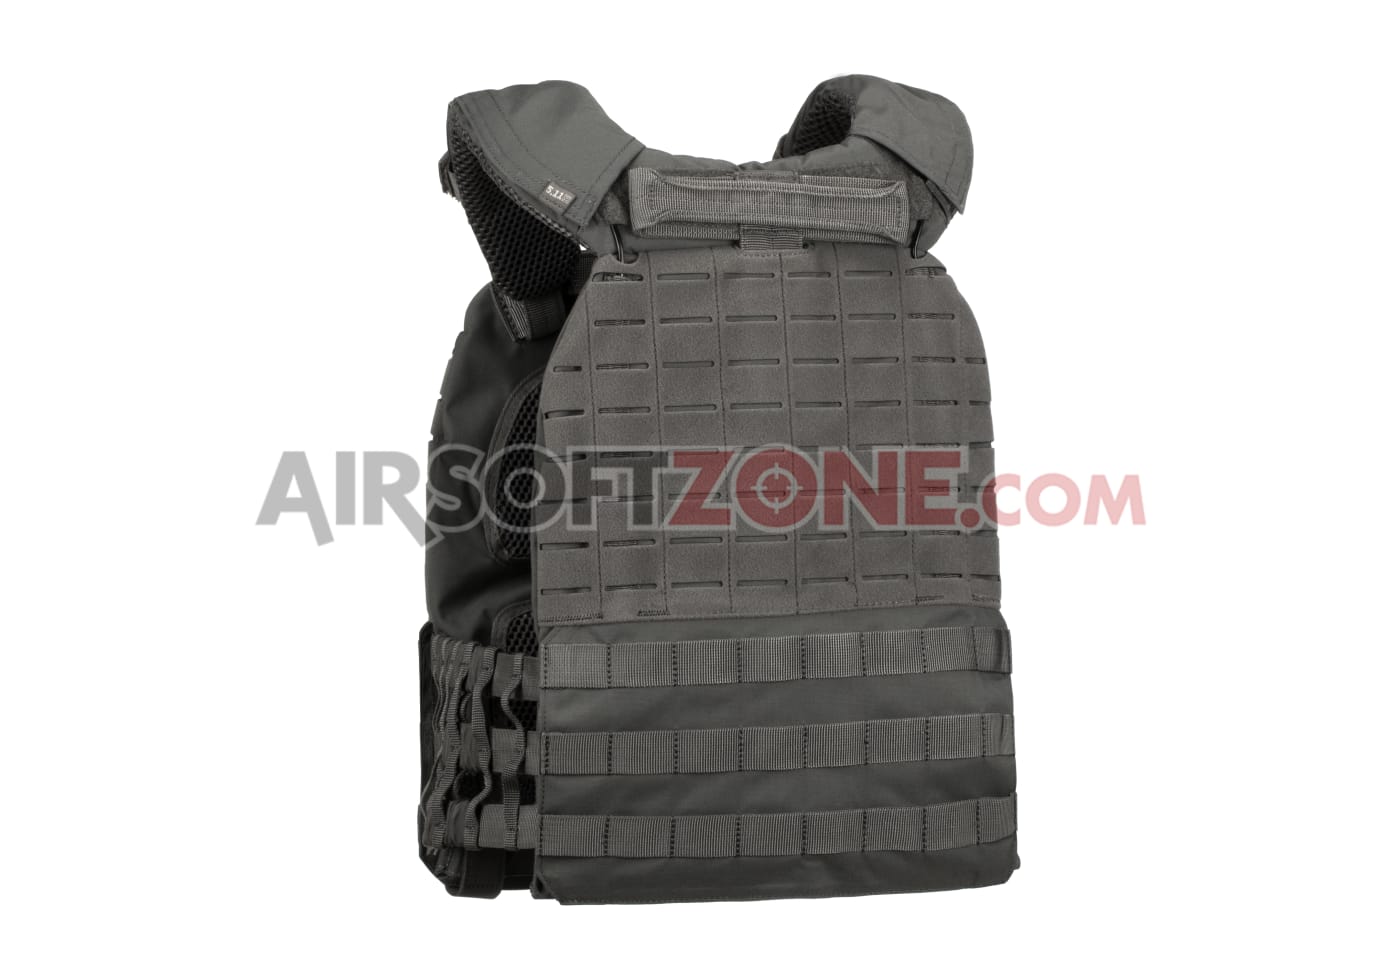 5.11 Tactical - The TacTec Plate Carrier was designed with